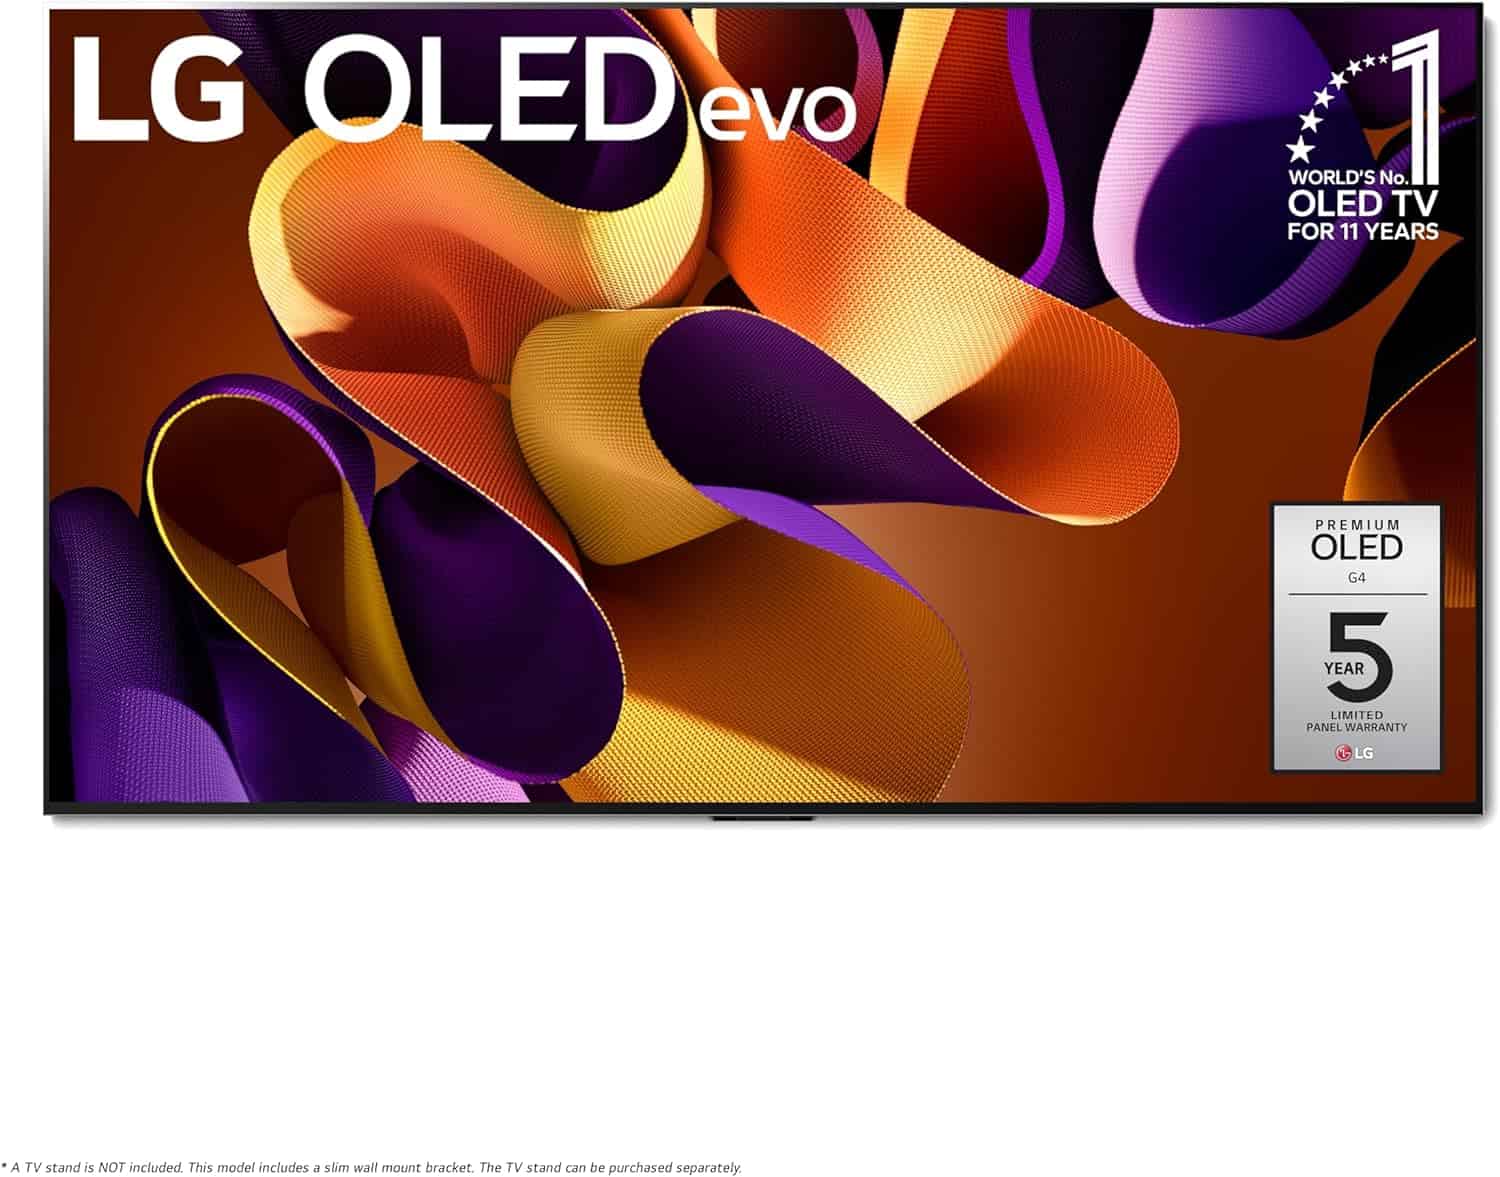 LG G4 OLED TV displaying vibrant abstract graphics with purple, orange, and yellow colors, noted for being the world's no.1 OLED brand for 11 years.